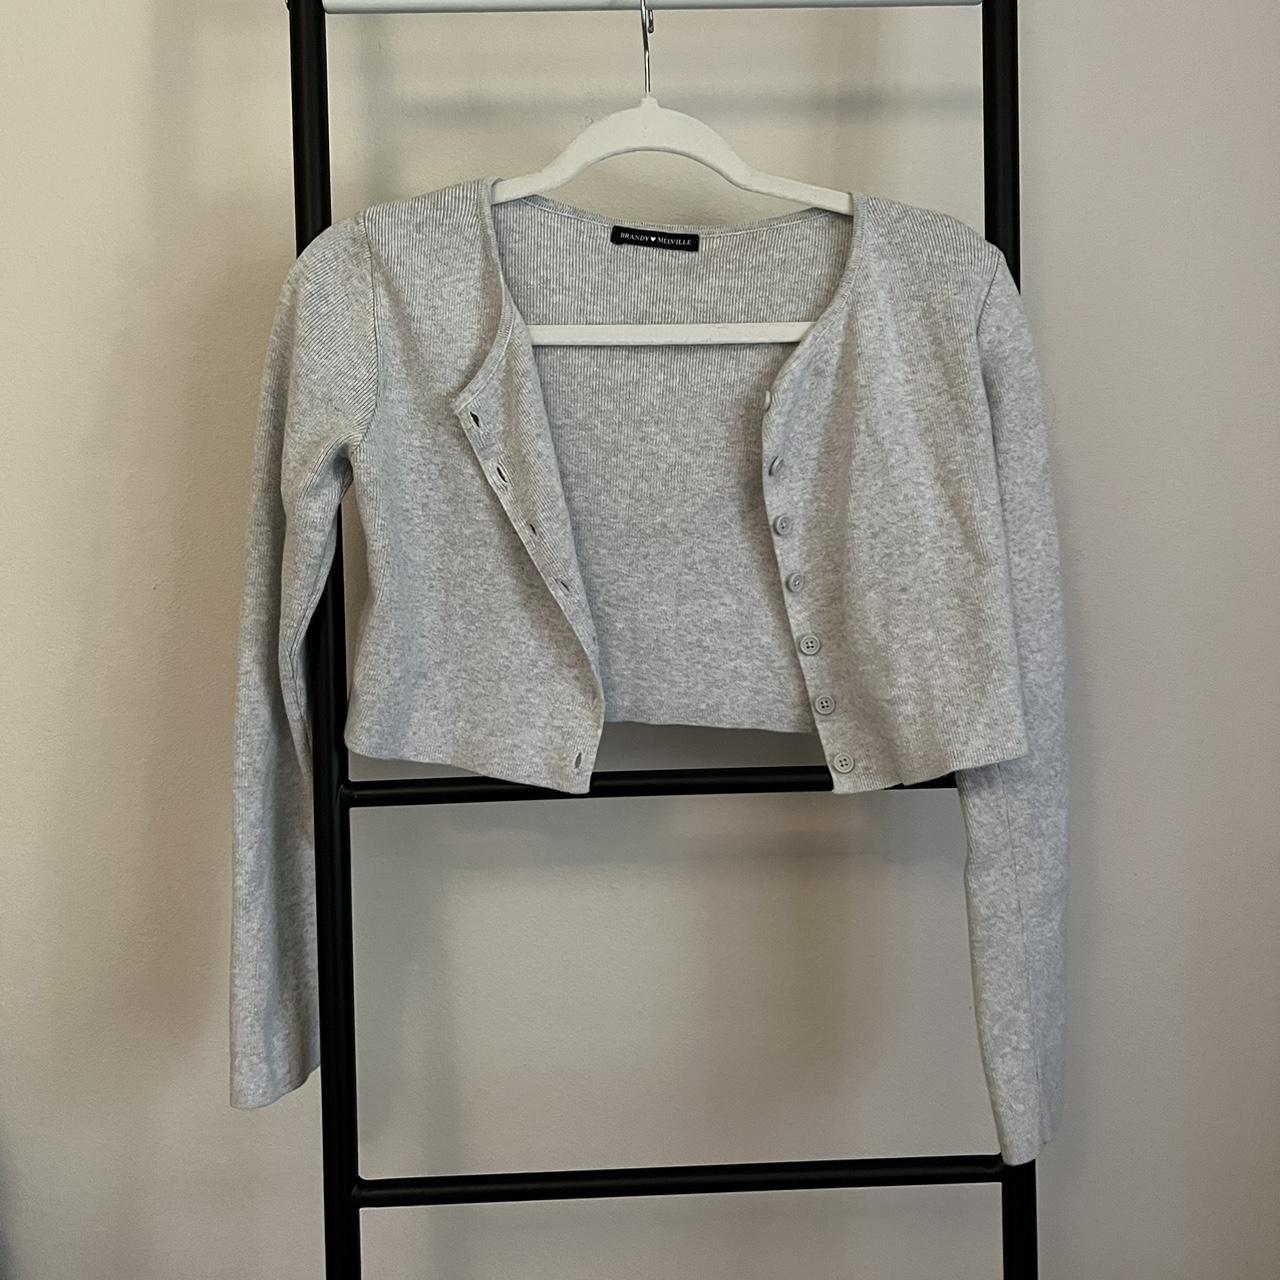 Brandy Melville Color Block Solid Gray Cardigan One Size - 60% off